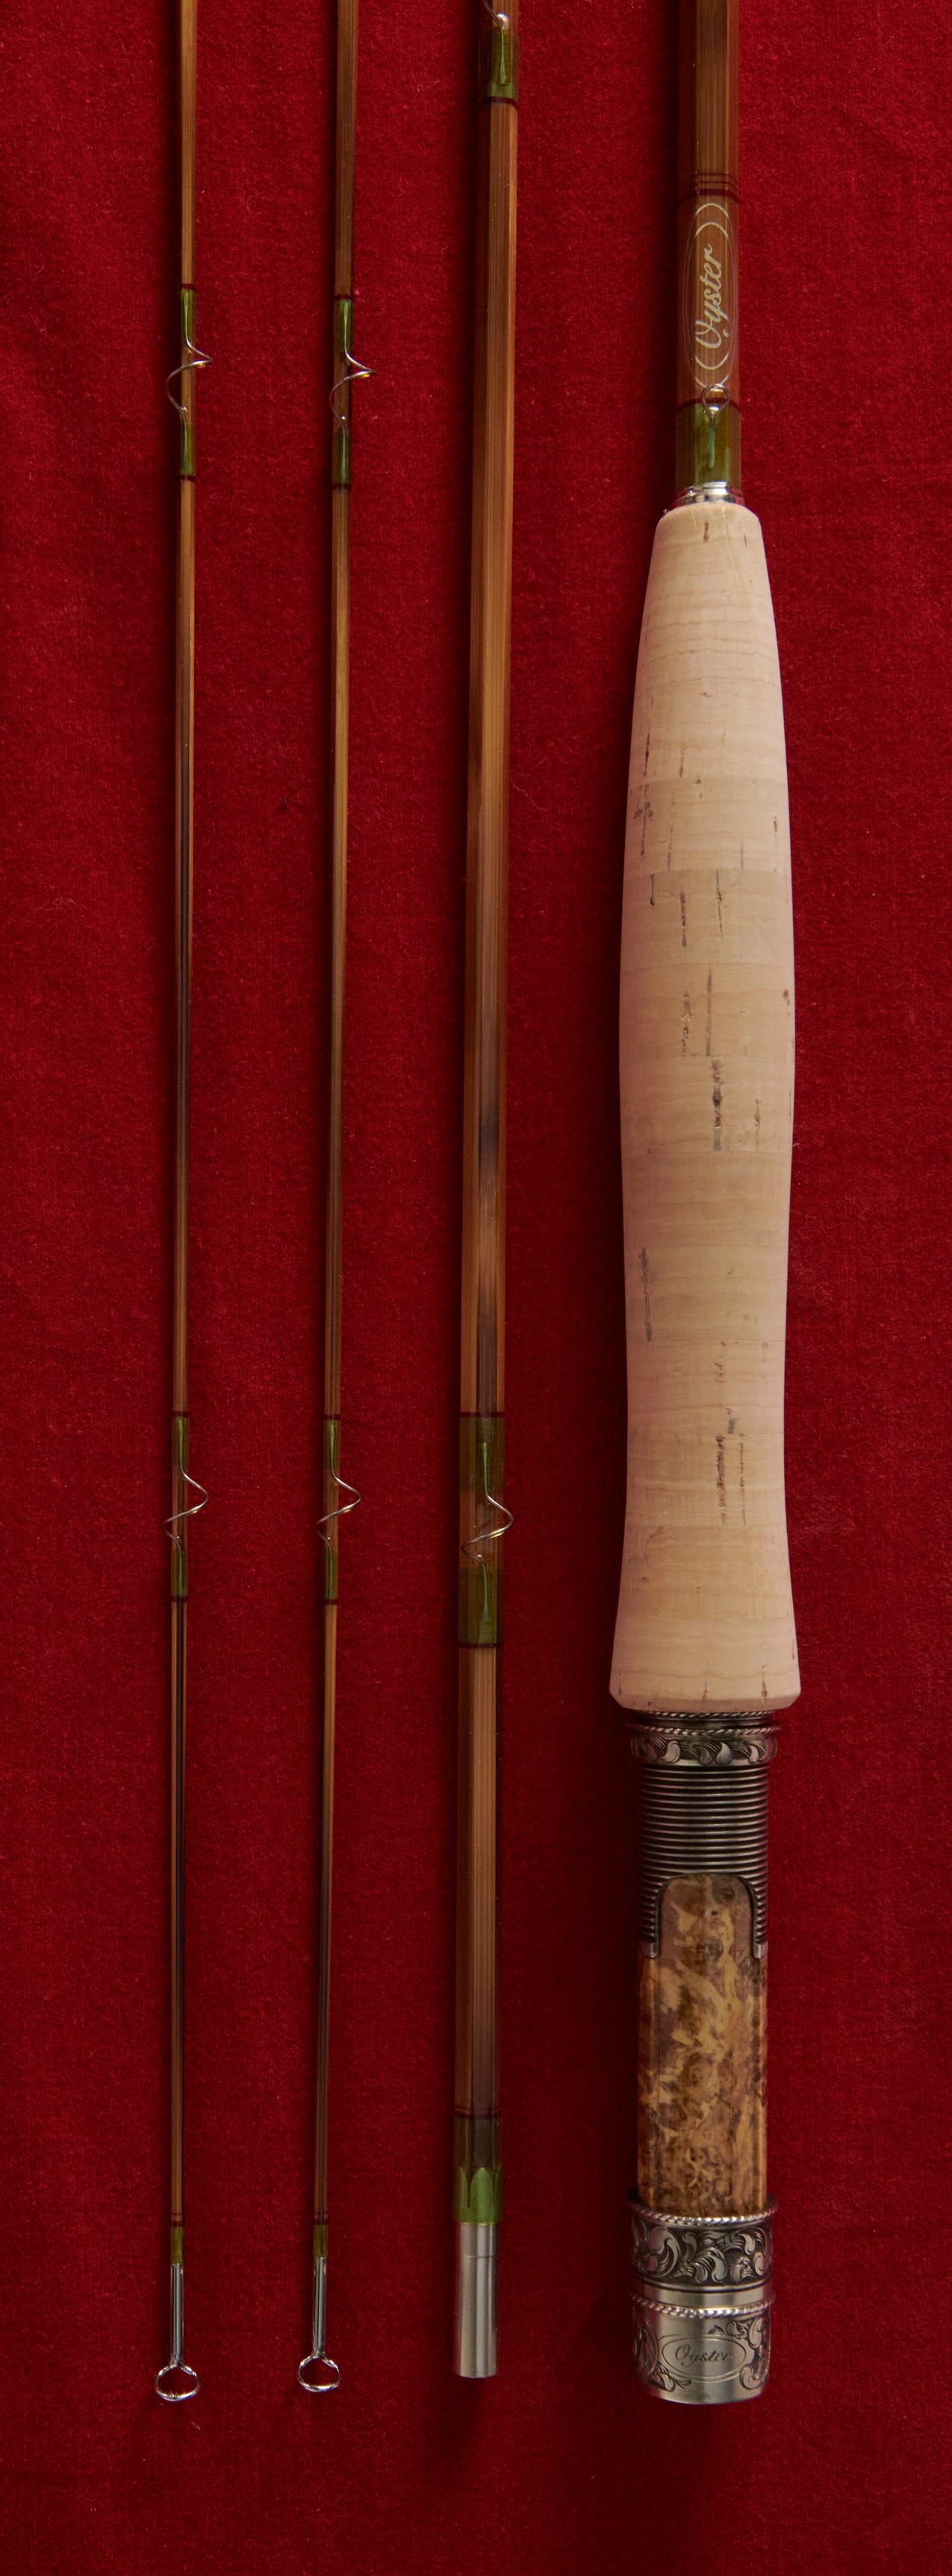 7' 9" 4wt Oyster Bamboo Fly Rod Master Series